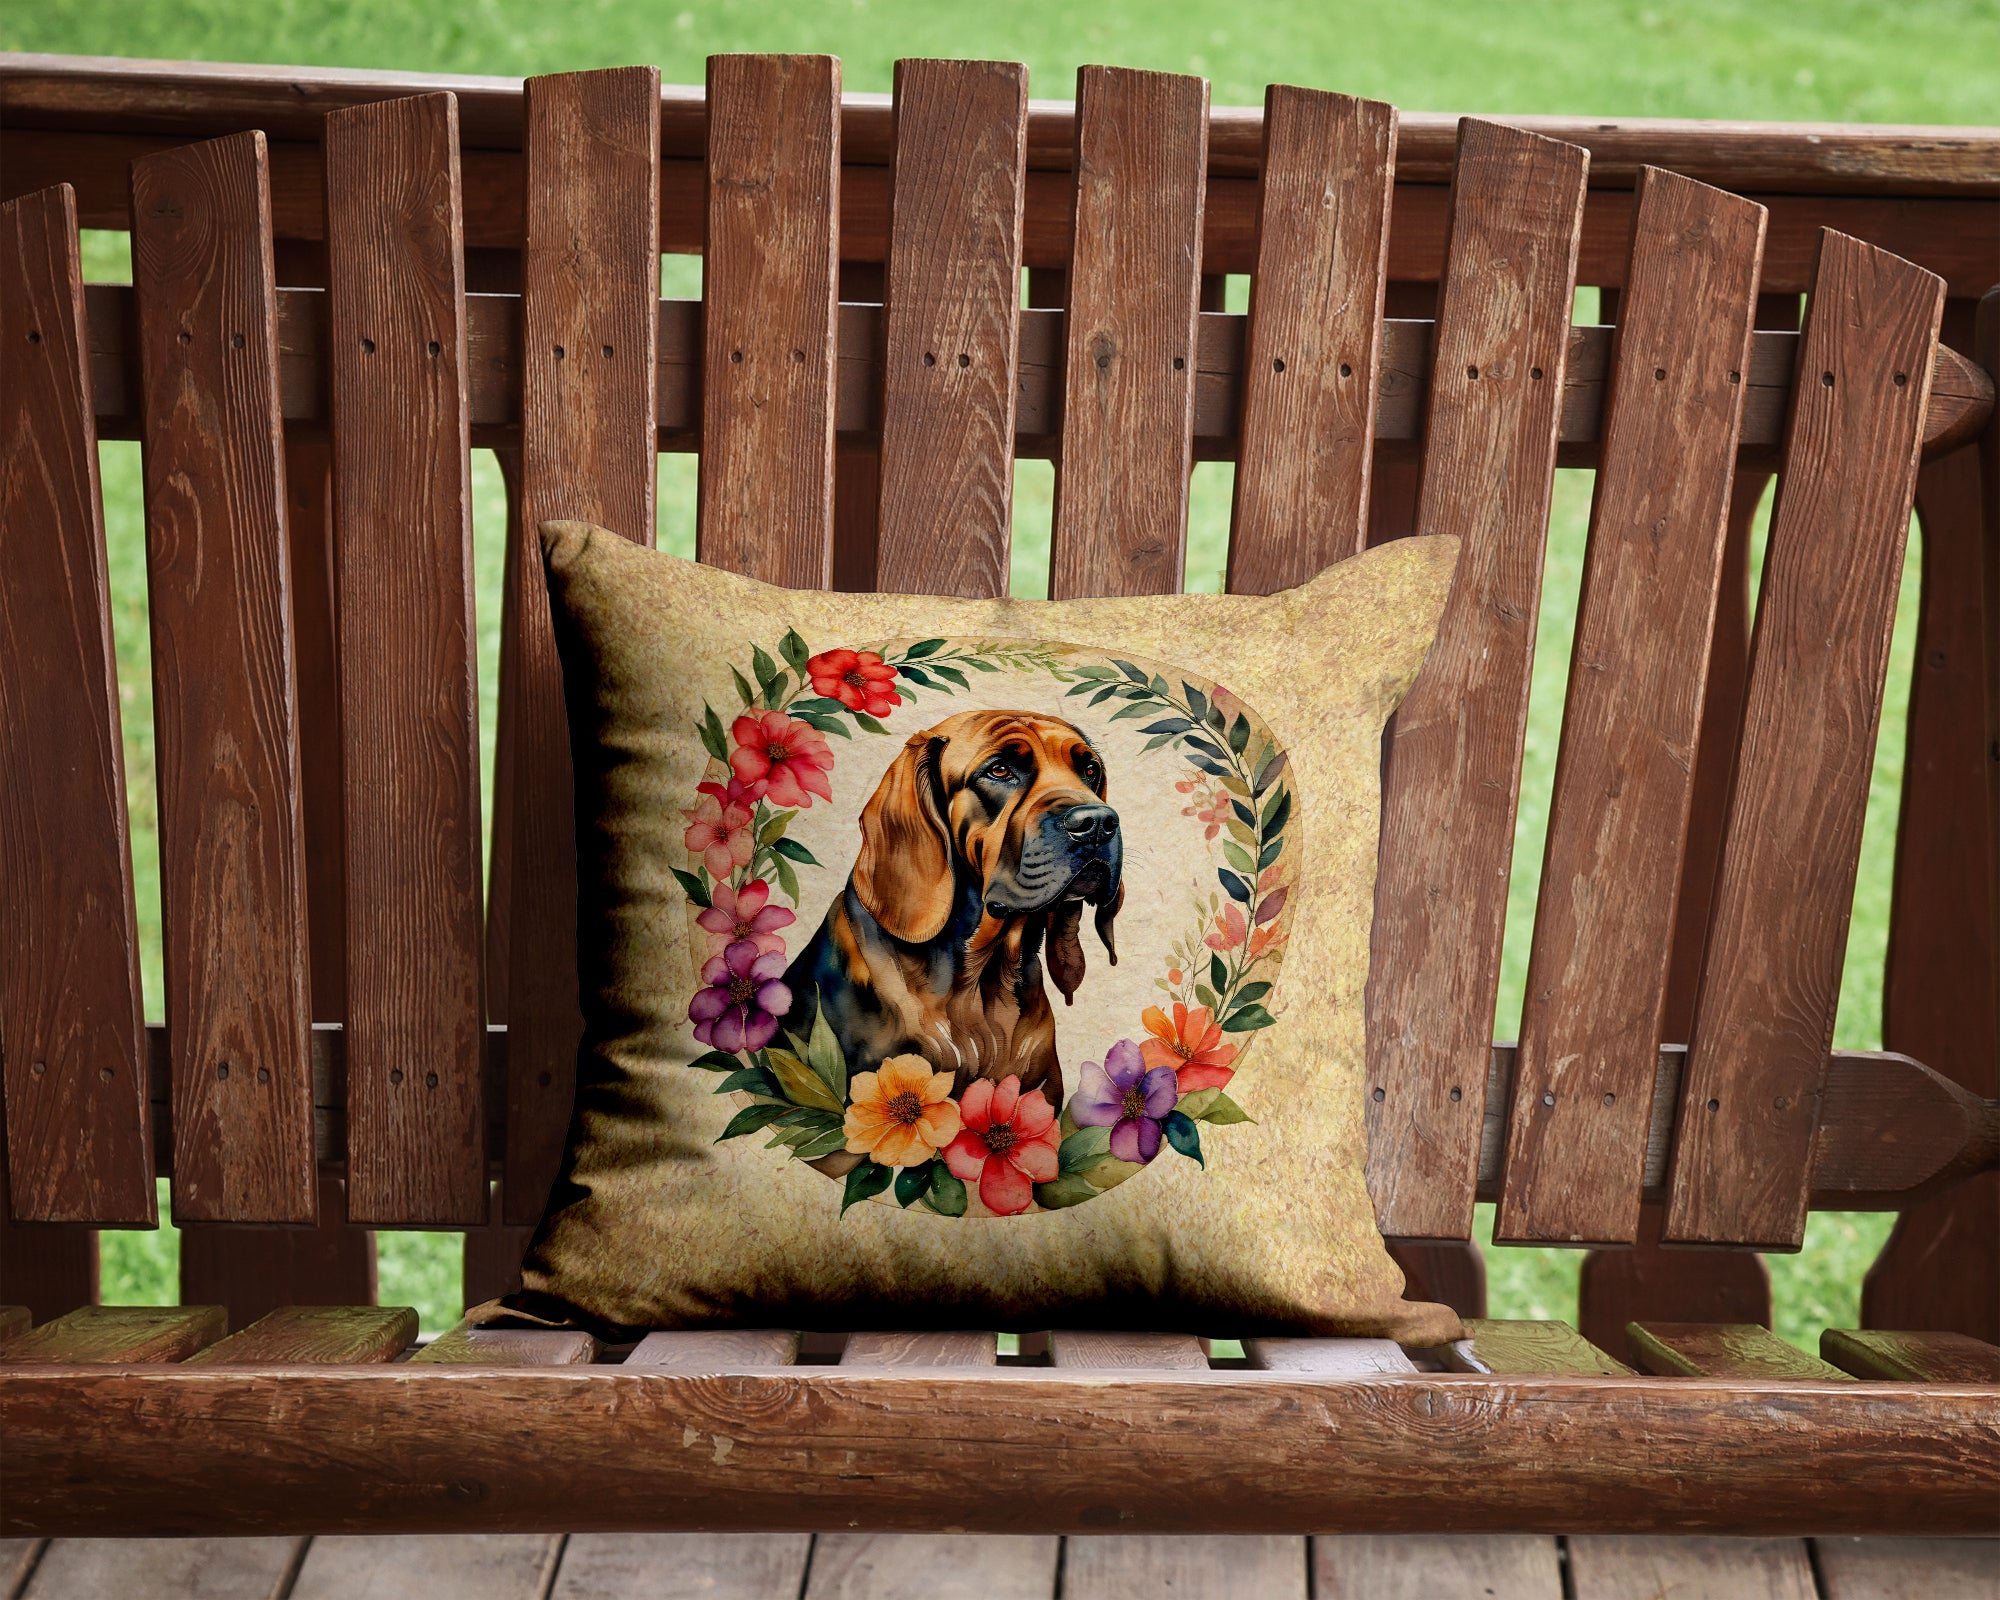 Bloodhound and Flowers Fabric Decorative Pillow